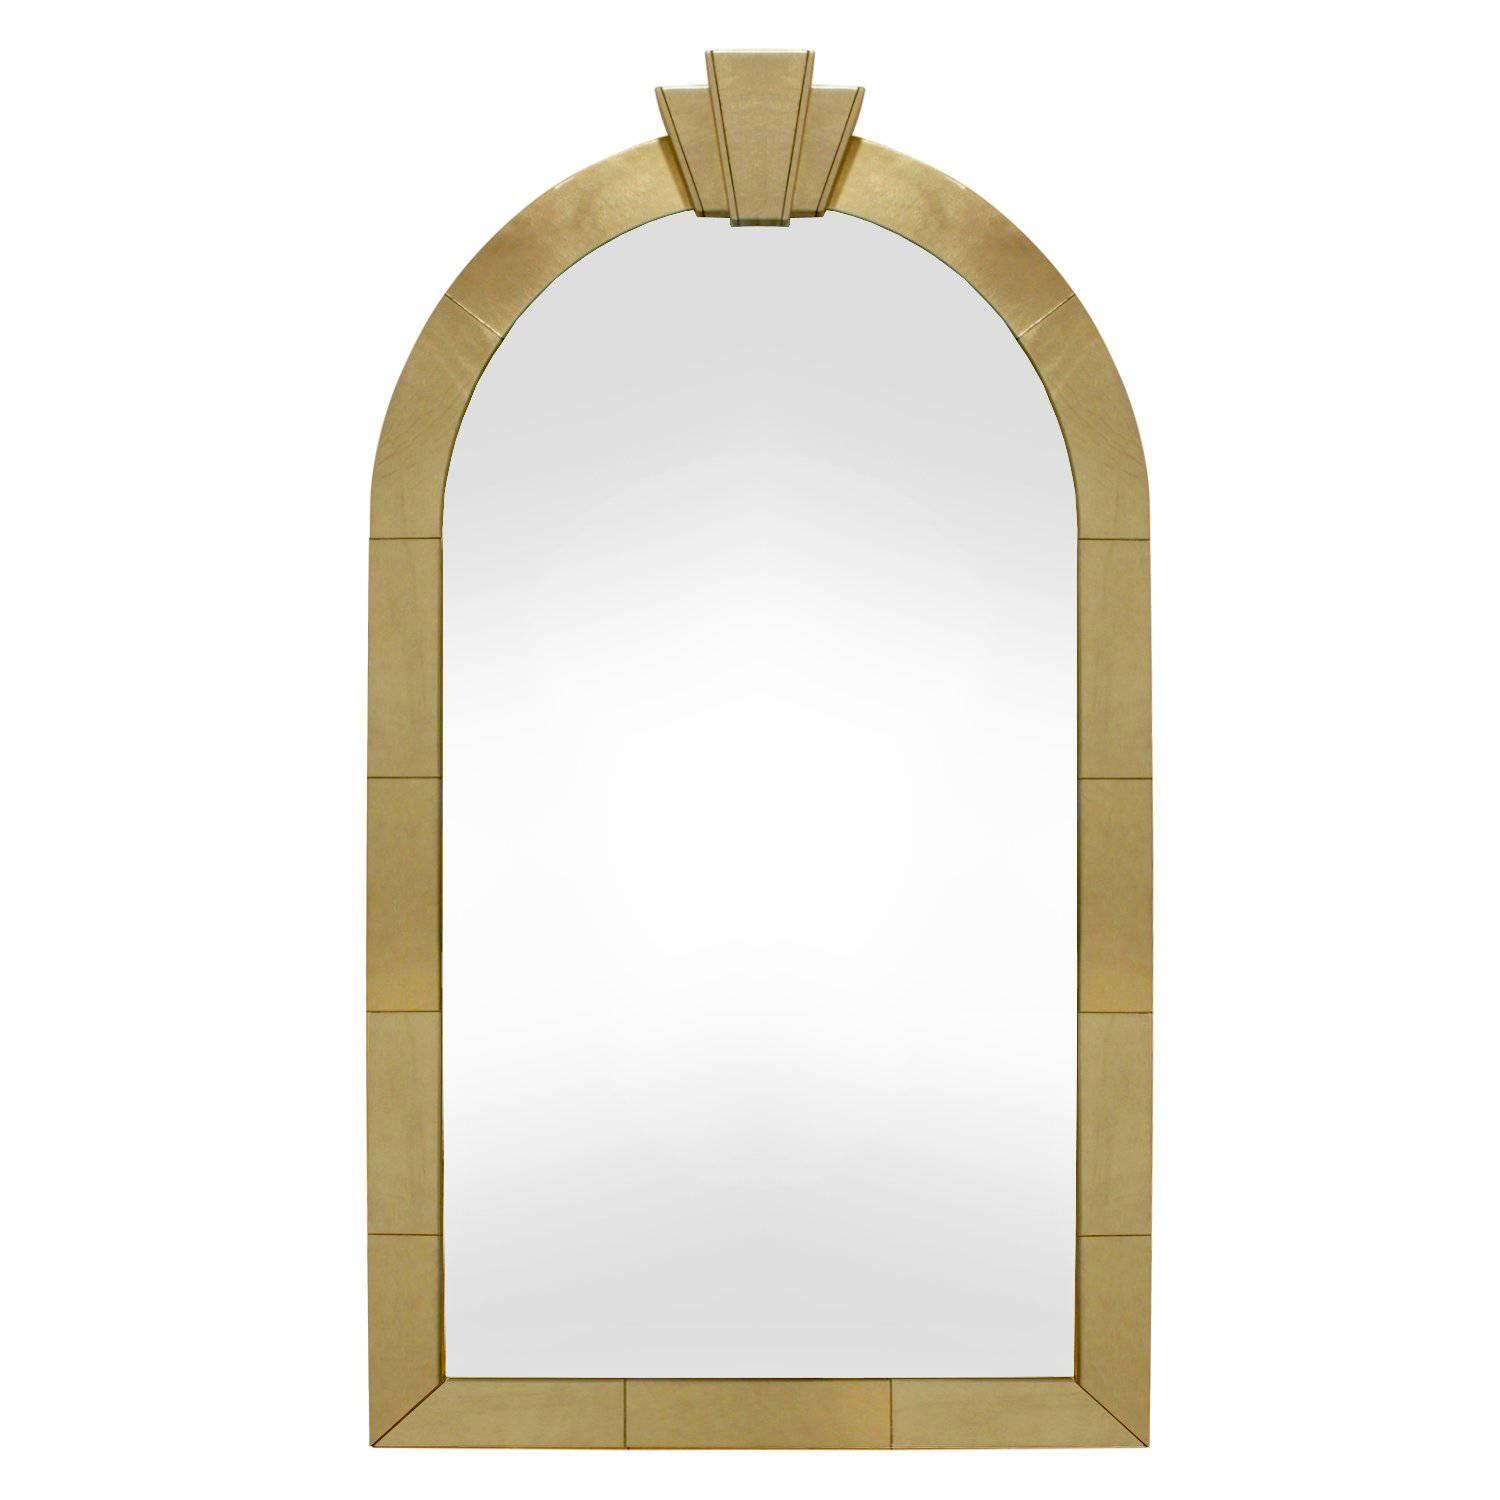 Karl Springer "Dome Top Art Deco Mirror" in Gold Leather, 1991 'Signed'